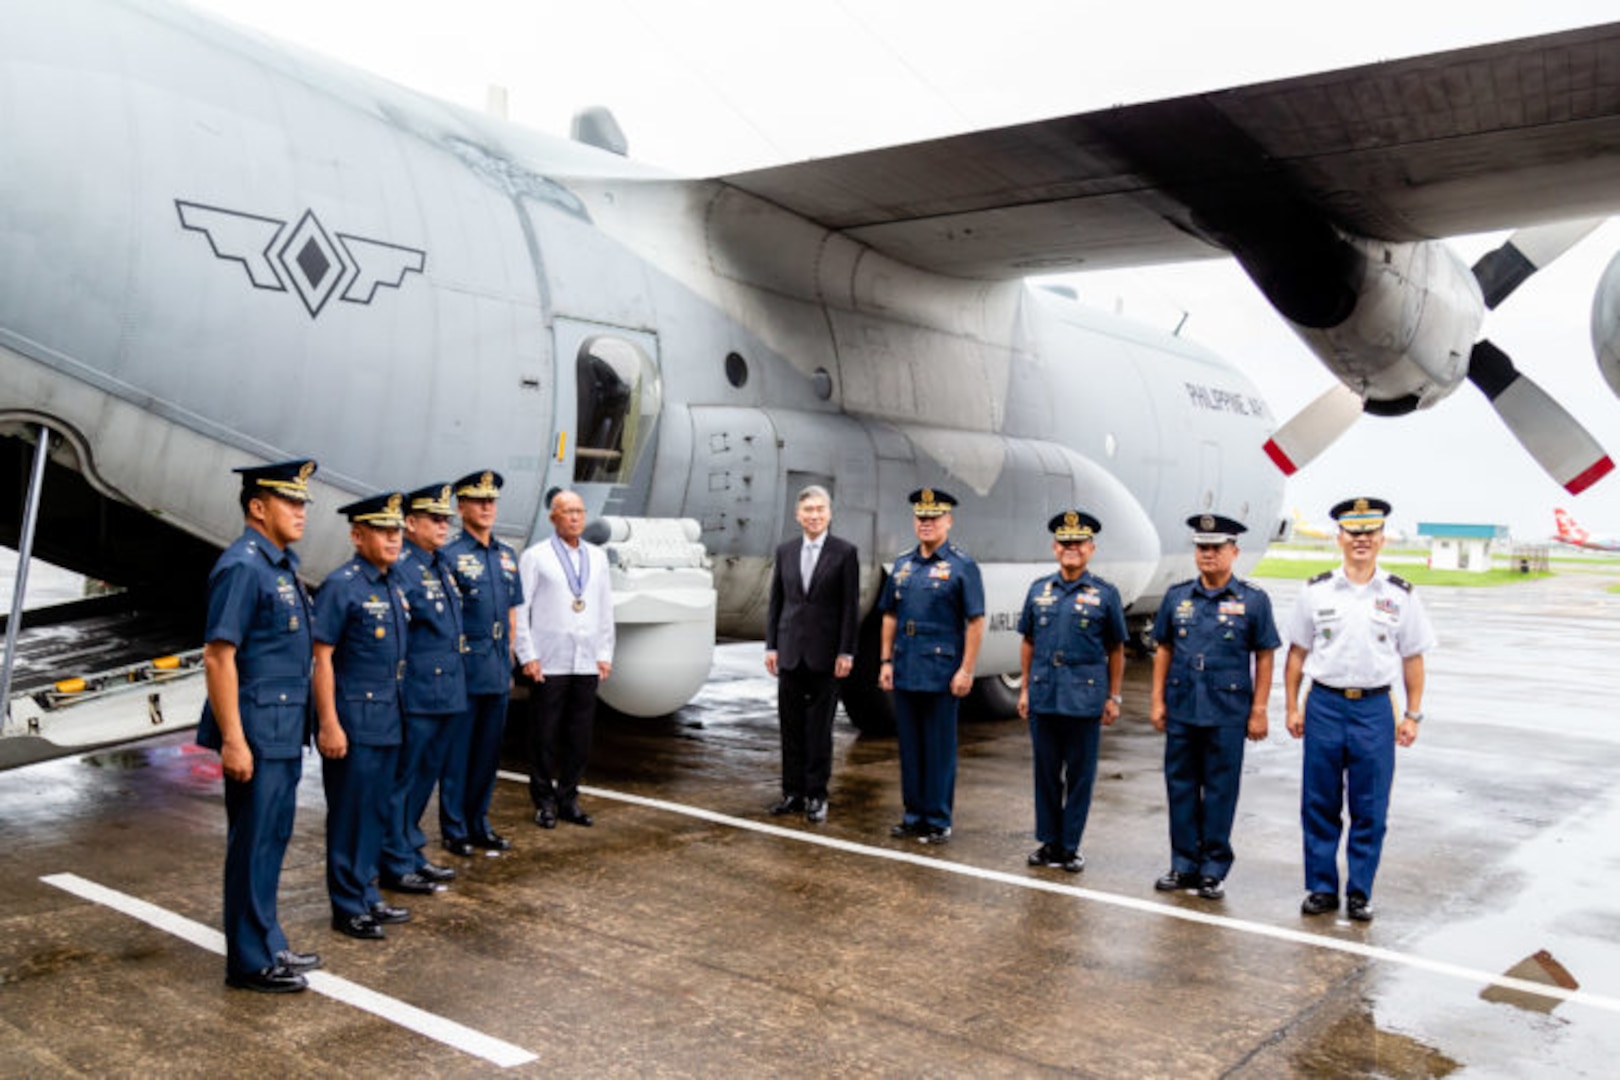 U.S. Government Provides New SABIR System to Enhance Philippine Air Force Capabilities